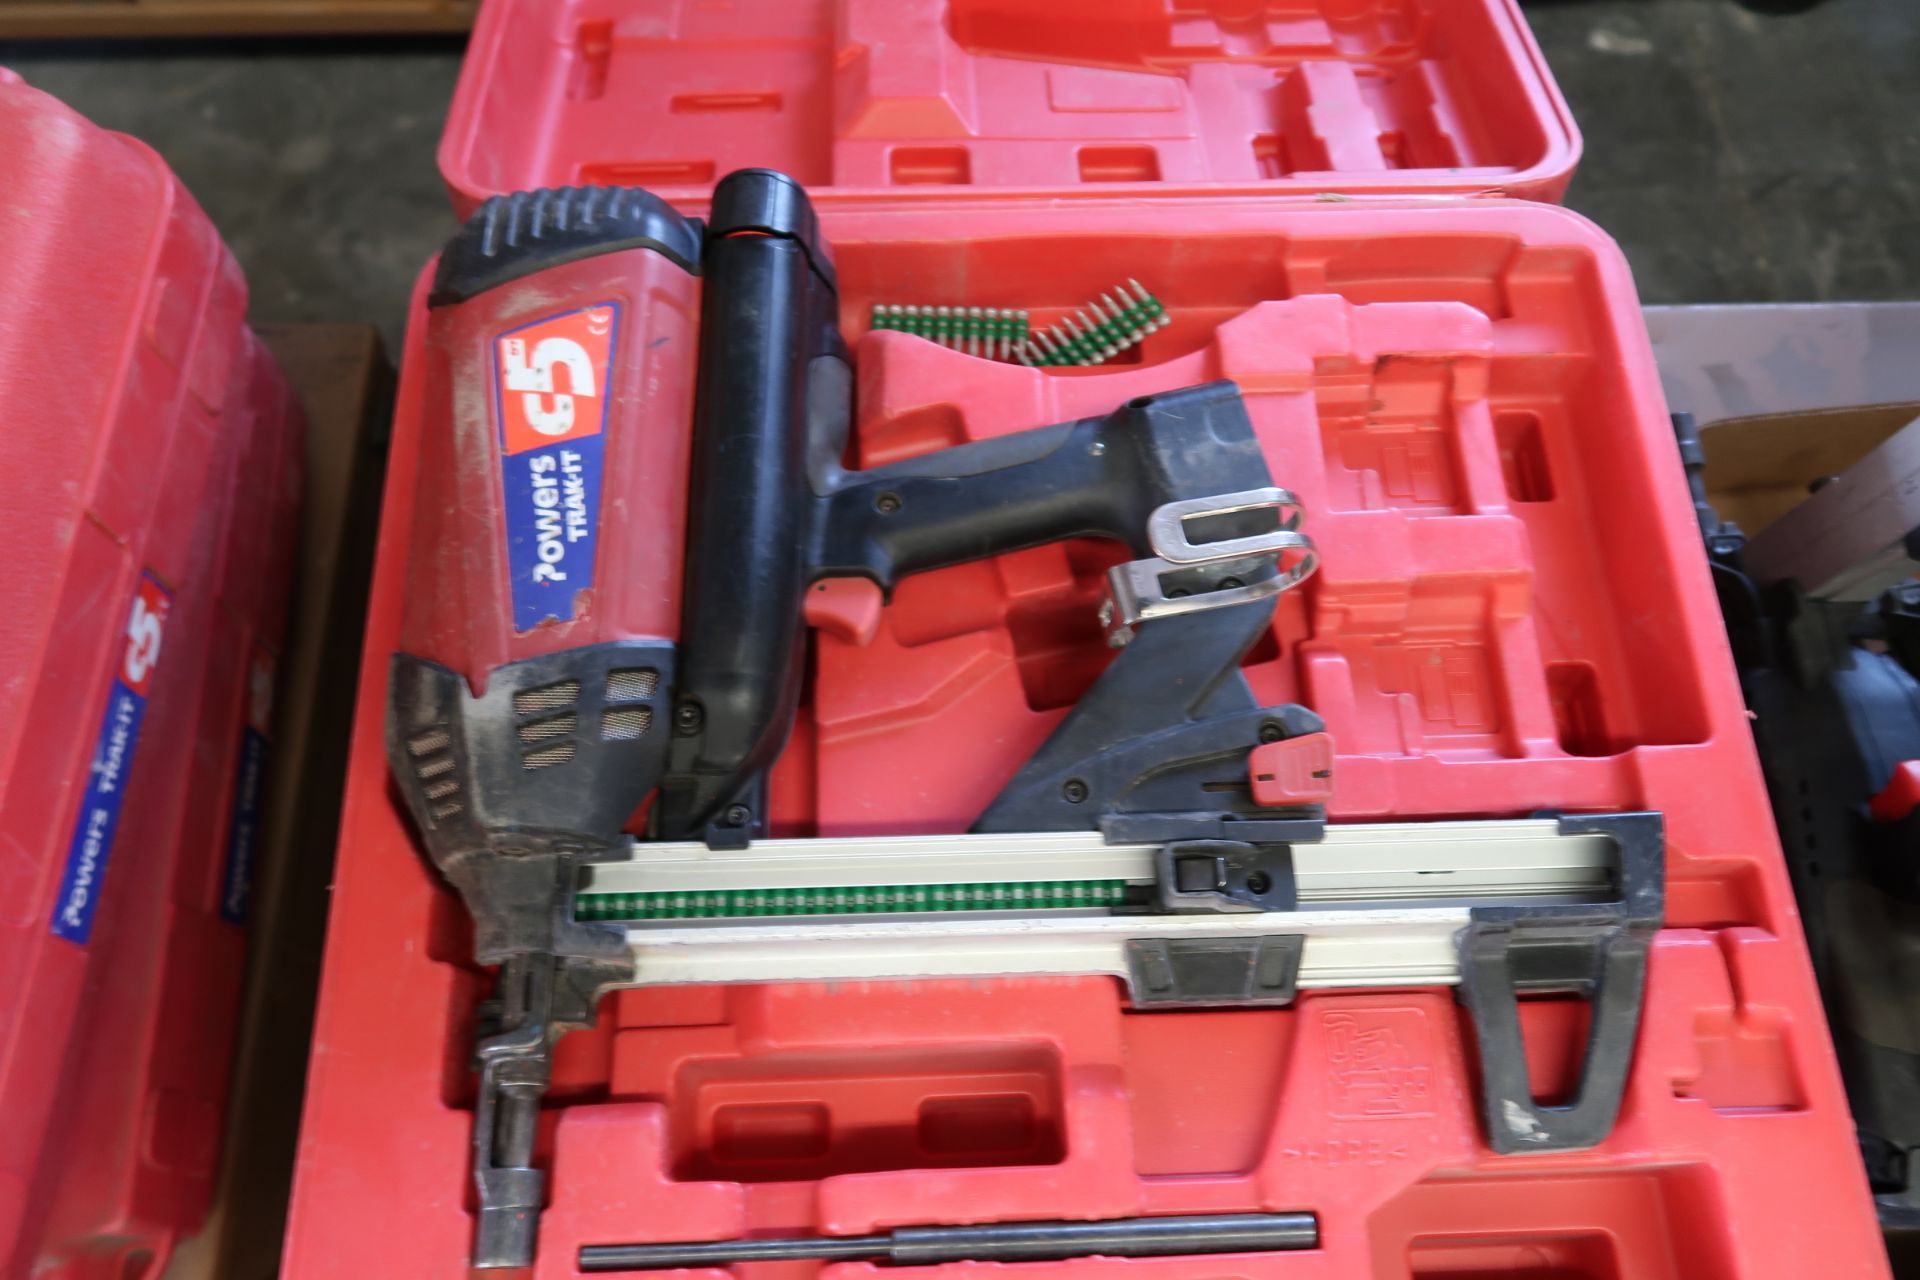 Powers "Trak-It C5" Cordless Nailers (2 - NO BATTERIES OR CHARGERS) (SOLD AS-IS - NO WARRANTY) - Image 2 of 5